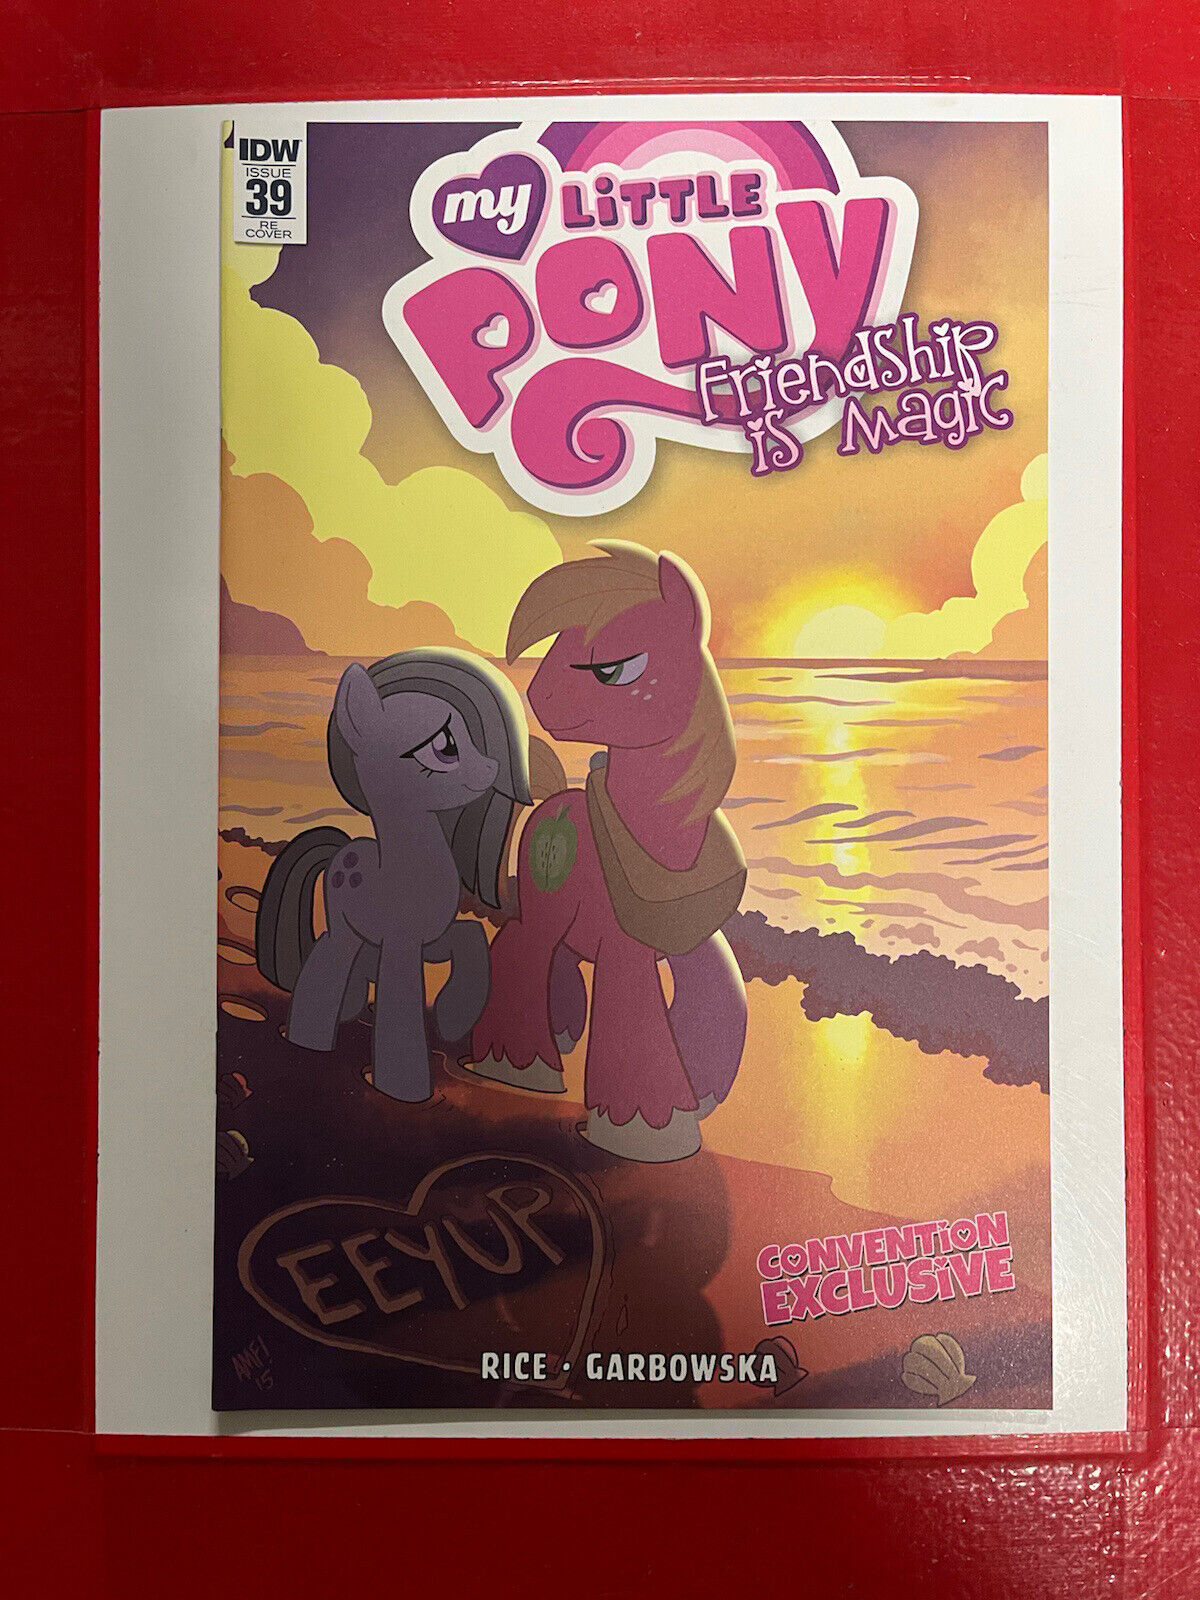 MY LITTLE PONY FRIENDSHIP IS MAGIC 39 Jetpack LIMITED EDITION variant IDW Brony 